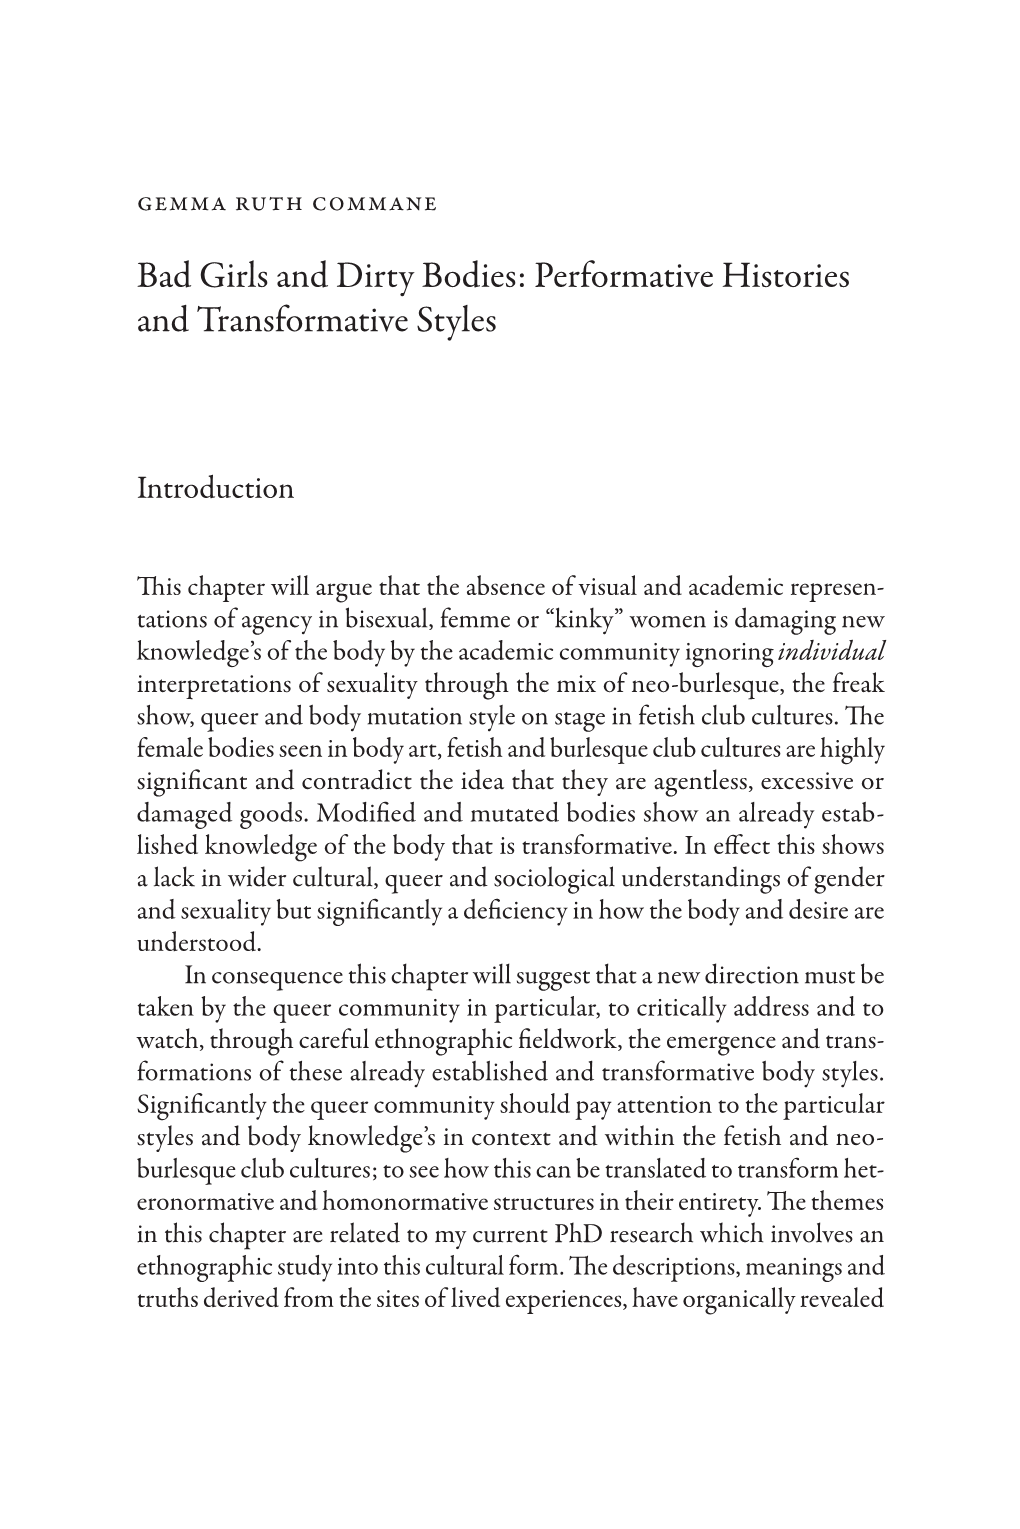 Performative Histories and Transformative Styles